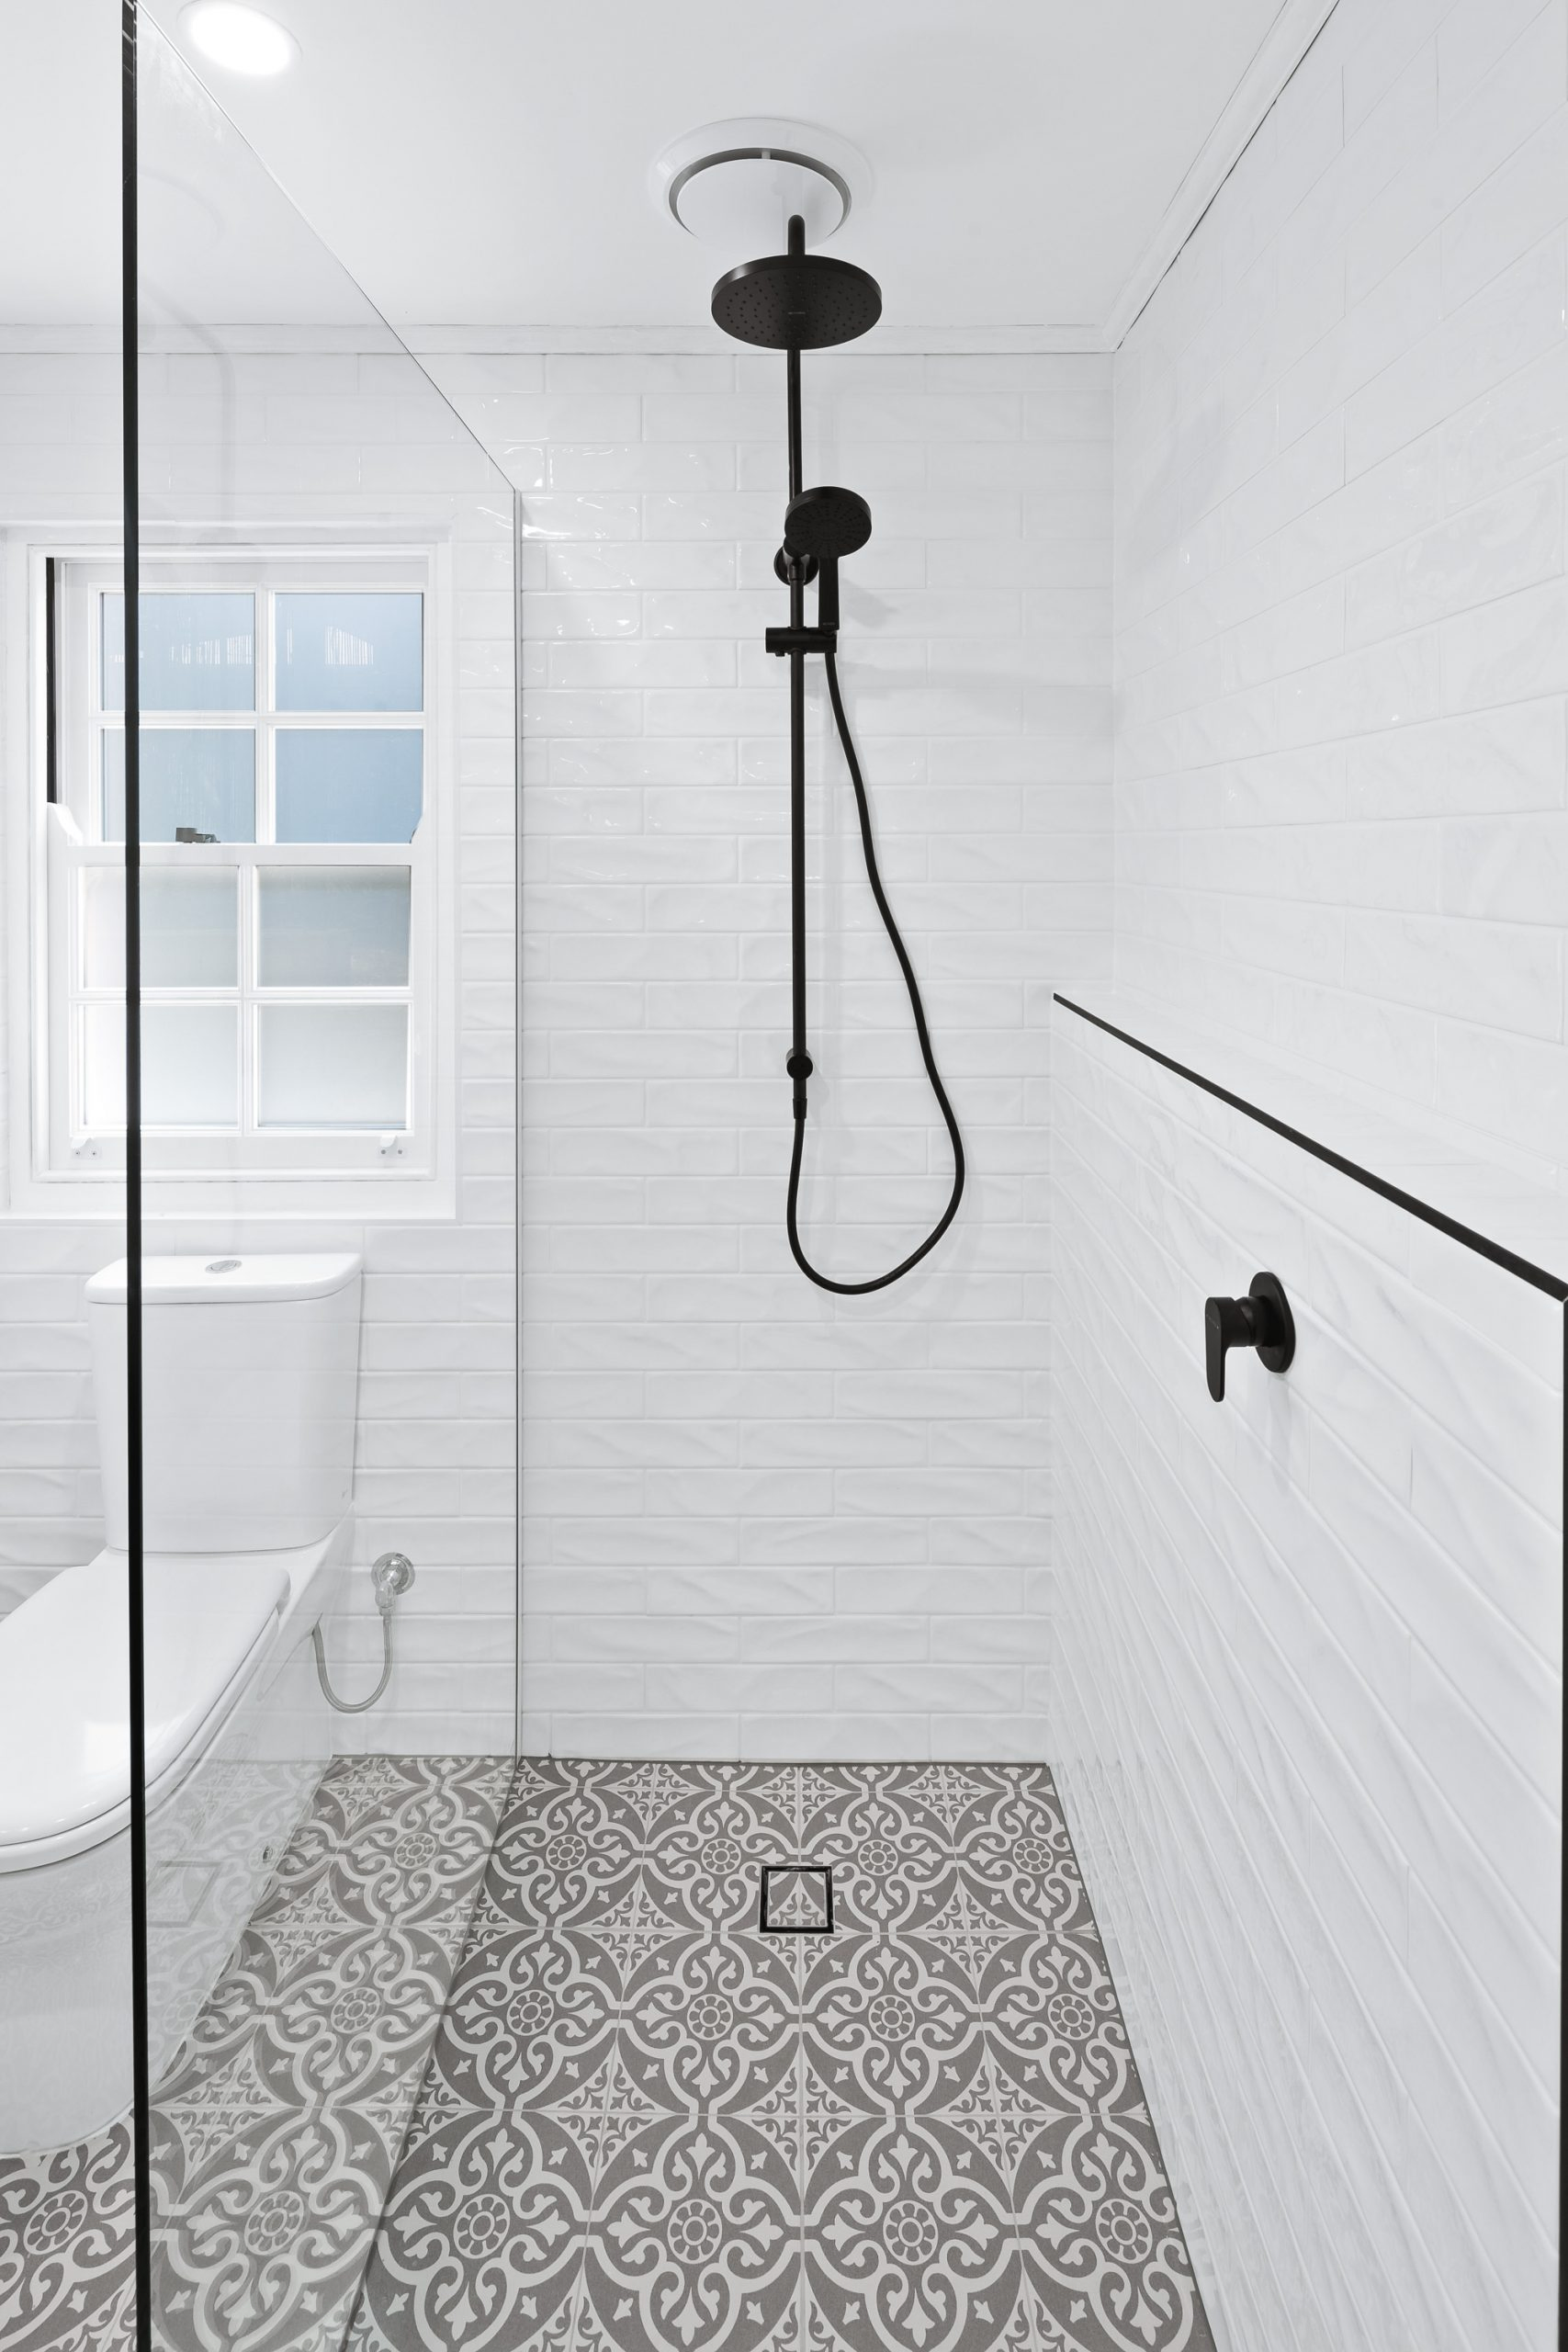 Patterned floor tiles and white subway tiles on the wall in a bright bathroom with black details